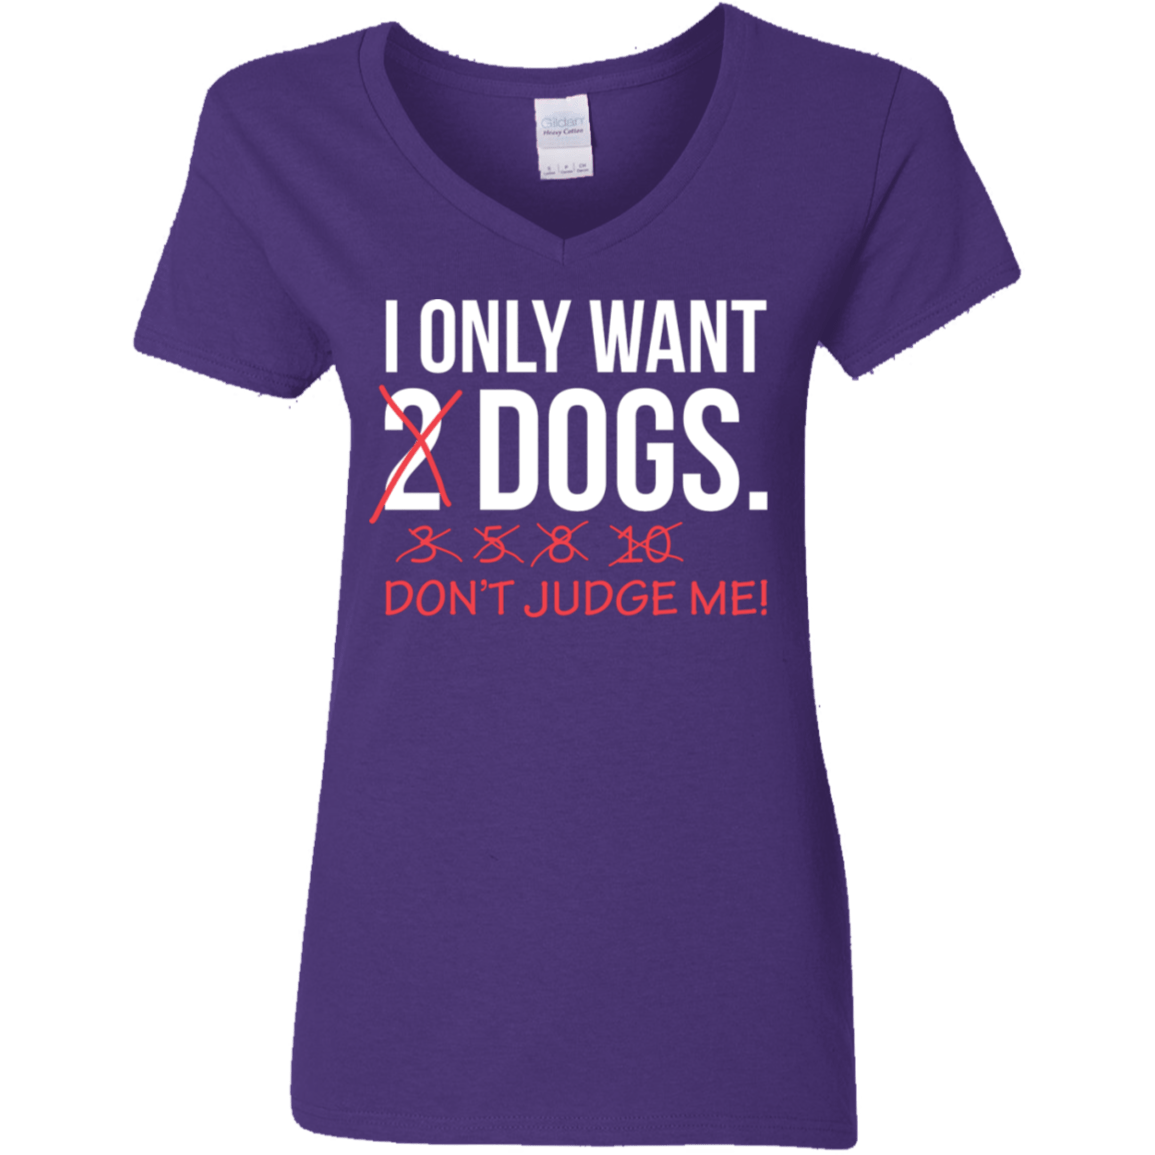 I Only Want 2 Dogs - Ladies V Neck.